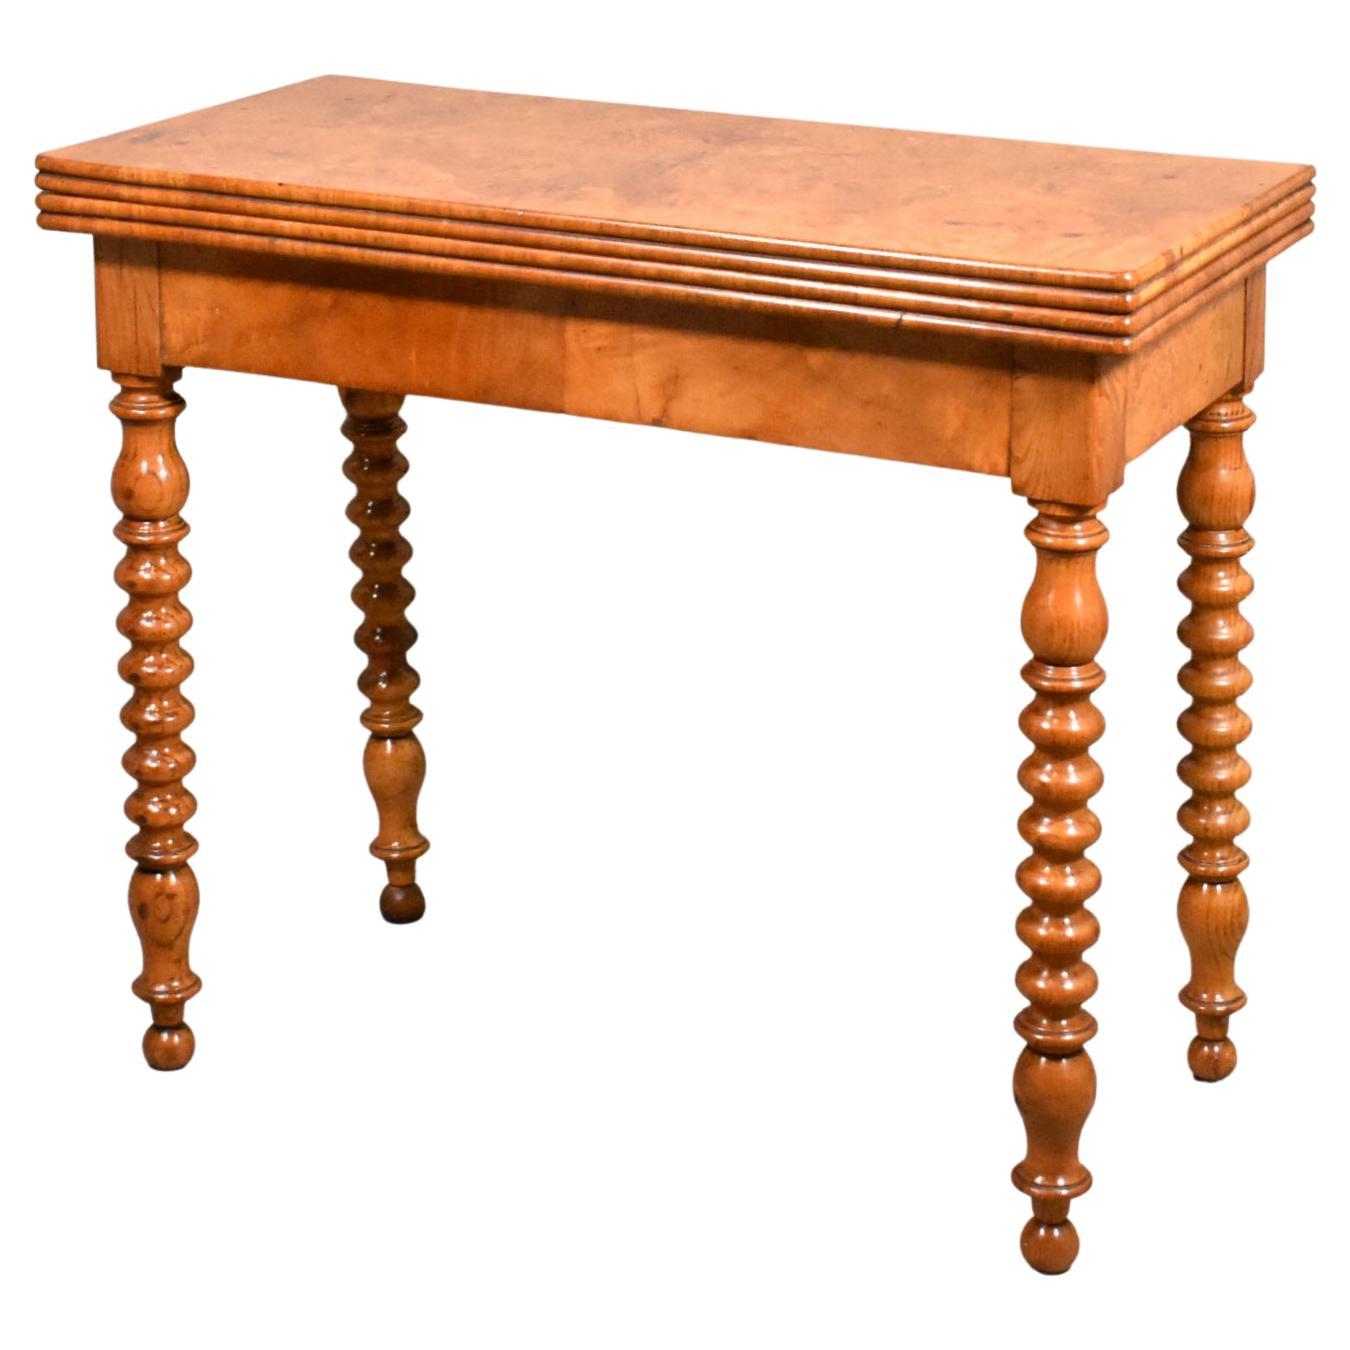 Antique French Burr Elm Folding Games Table, 19th Century